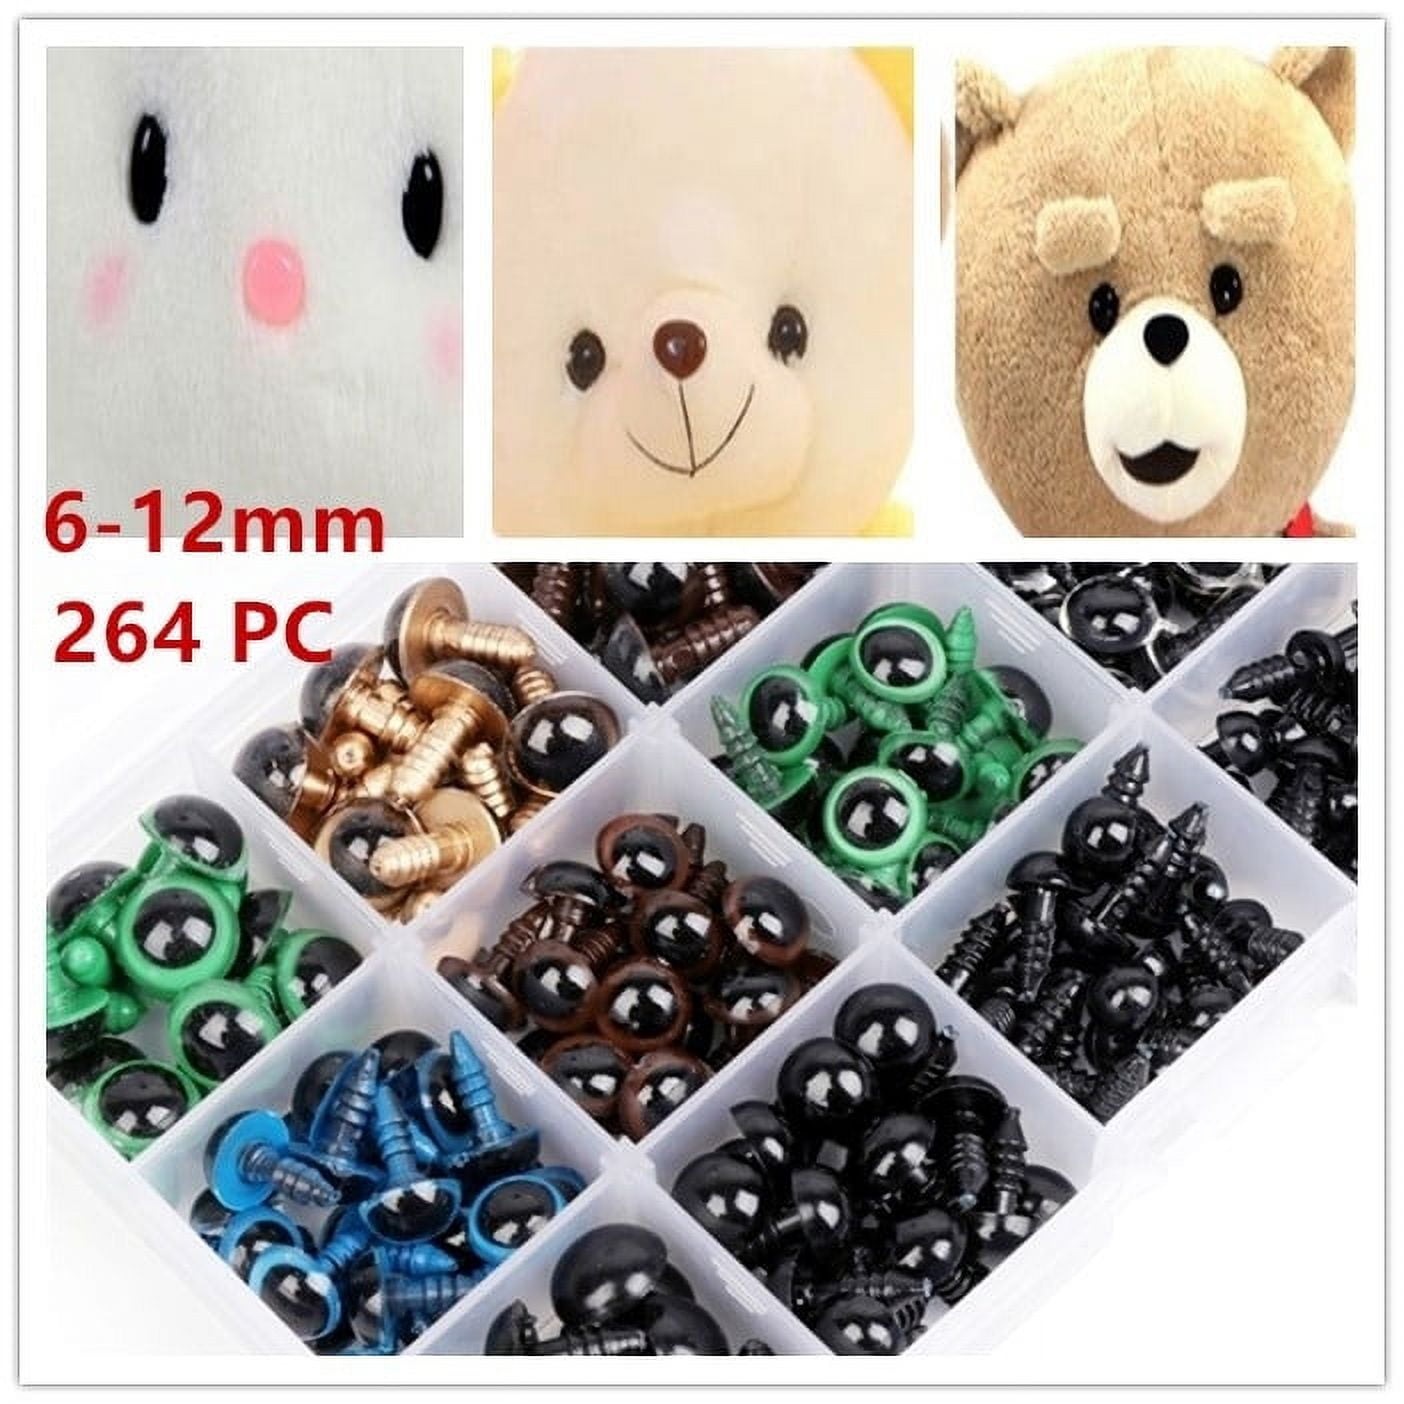 Wholesale SUPERFINDINGS 36Pcs 12 Styles Wiggle Googly Eyes Half Round  Wobbly Glass Eyes Black White Eyes for DIY Crafts Teddy Bear Doll Making 